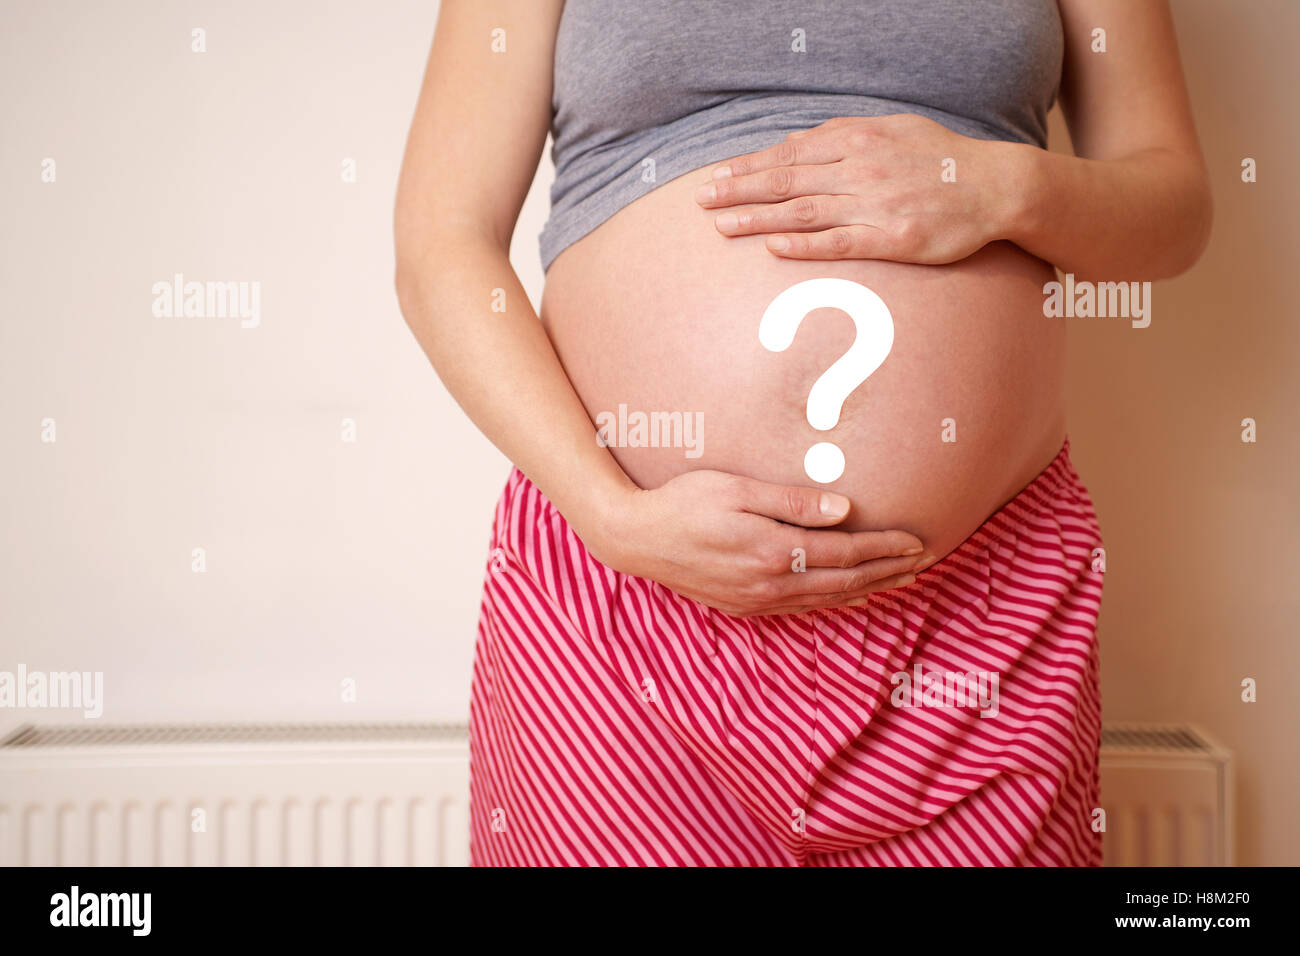 Midsection of an expectant woman touching belly while standing against wall Stock Photo